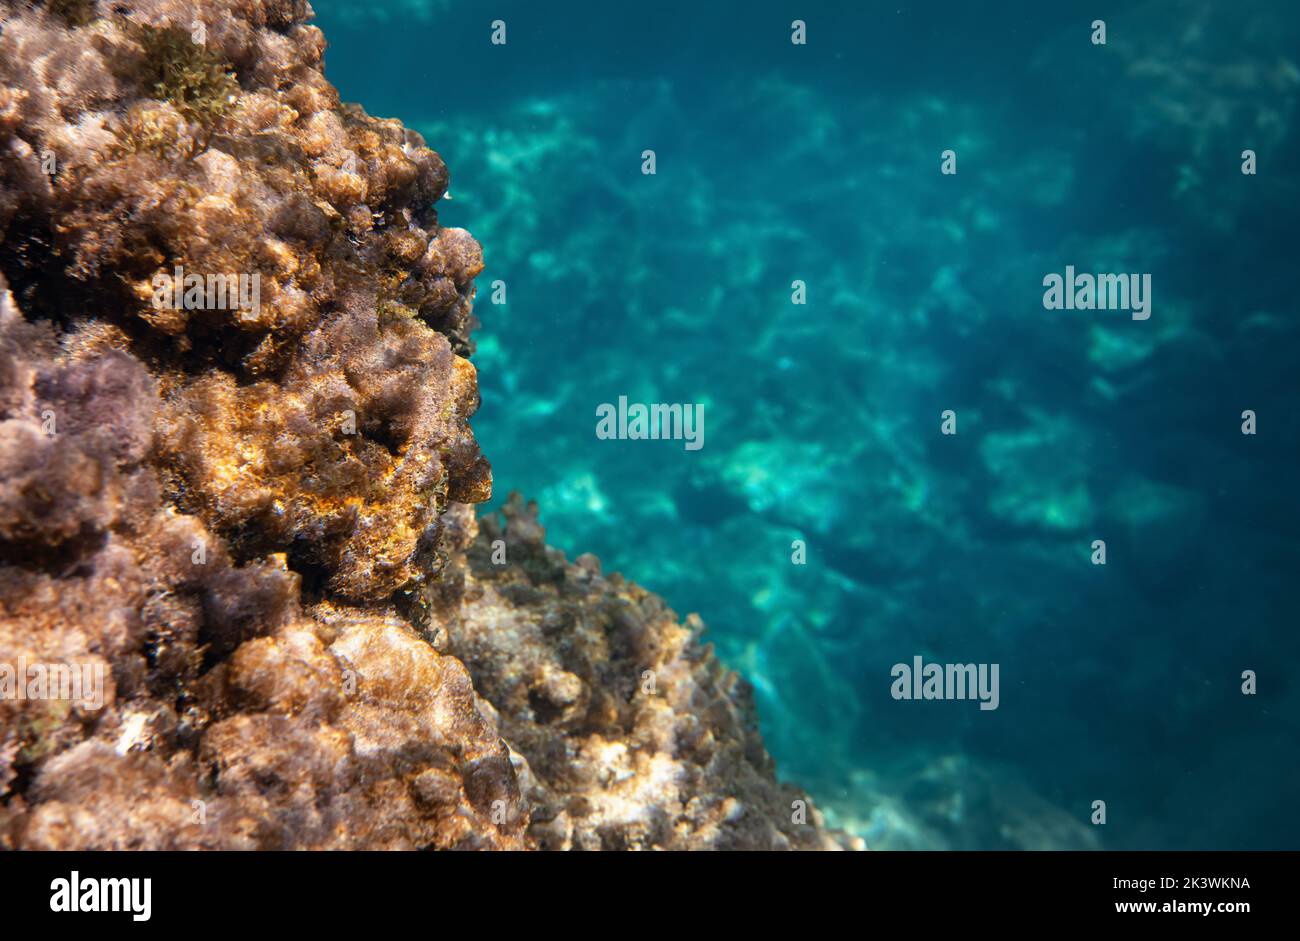 Underwater photo - snorkelling in Liapades, Corfu. Not much marine life - only algae and sea plants growing over rocks visible Stock Photo